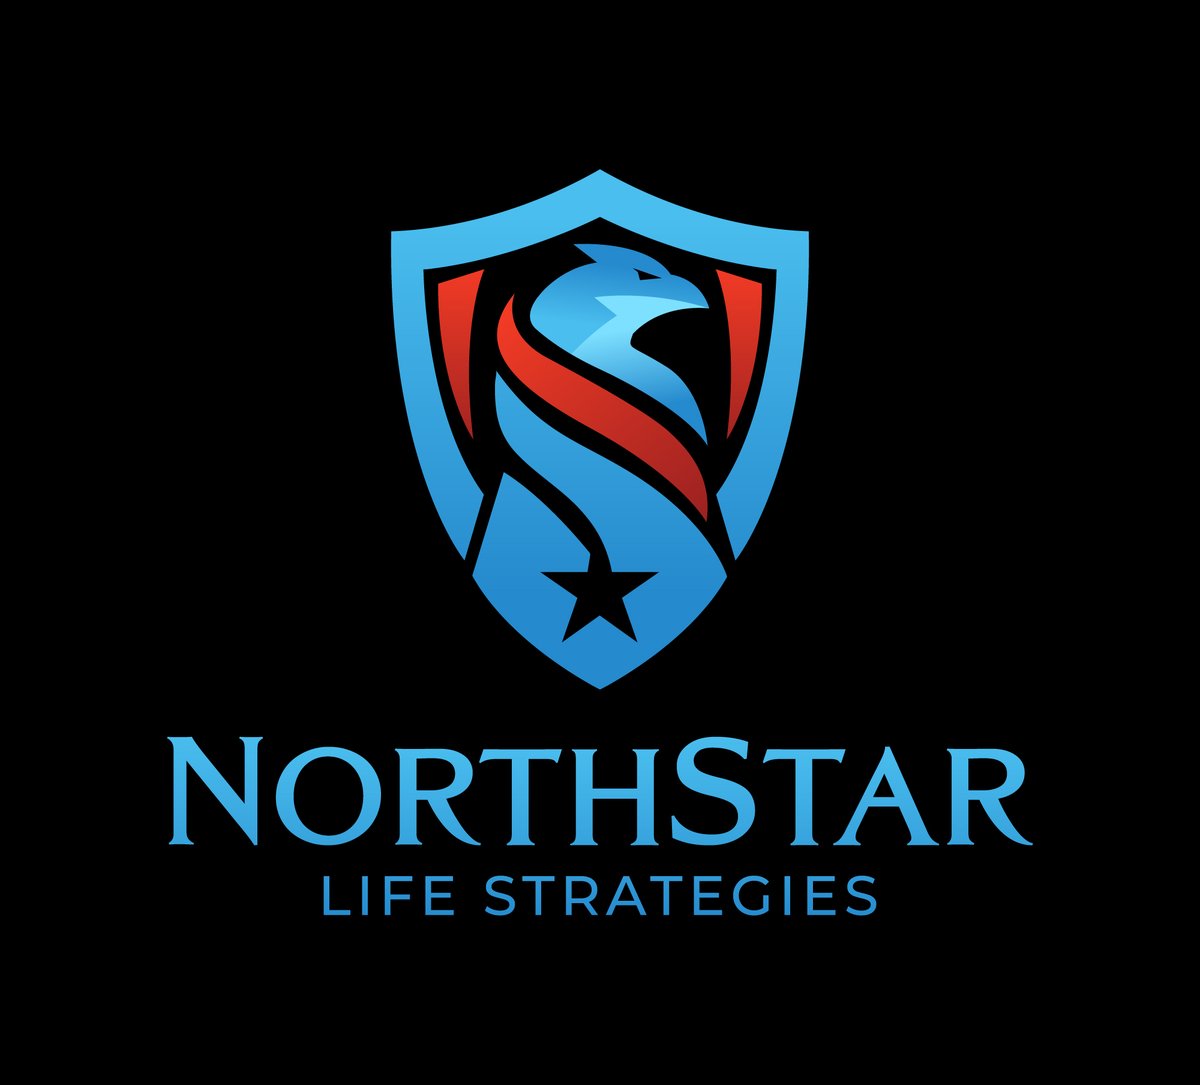 #NorthStar Logo design for new client.
I hope everyone like it. 

More Portfolio: cutt.ly/Dnts67g 

If anyone need #Logo design please contact me:
info@shabanakhatun.com

Thanks

#north #star #Security #SECURE2024 #life #strategies #Logo #LogoDesign #branding #Identity